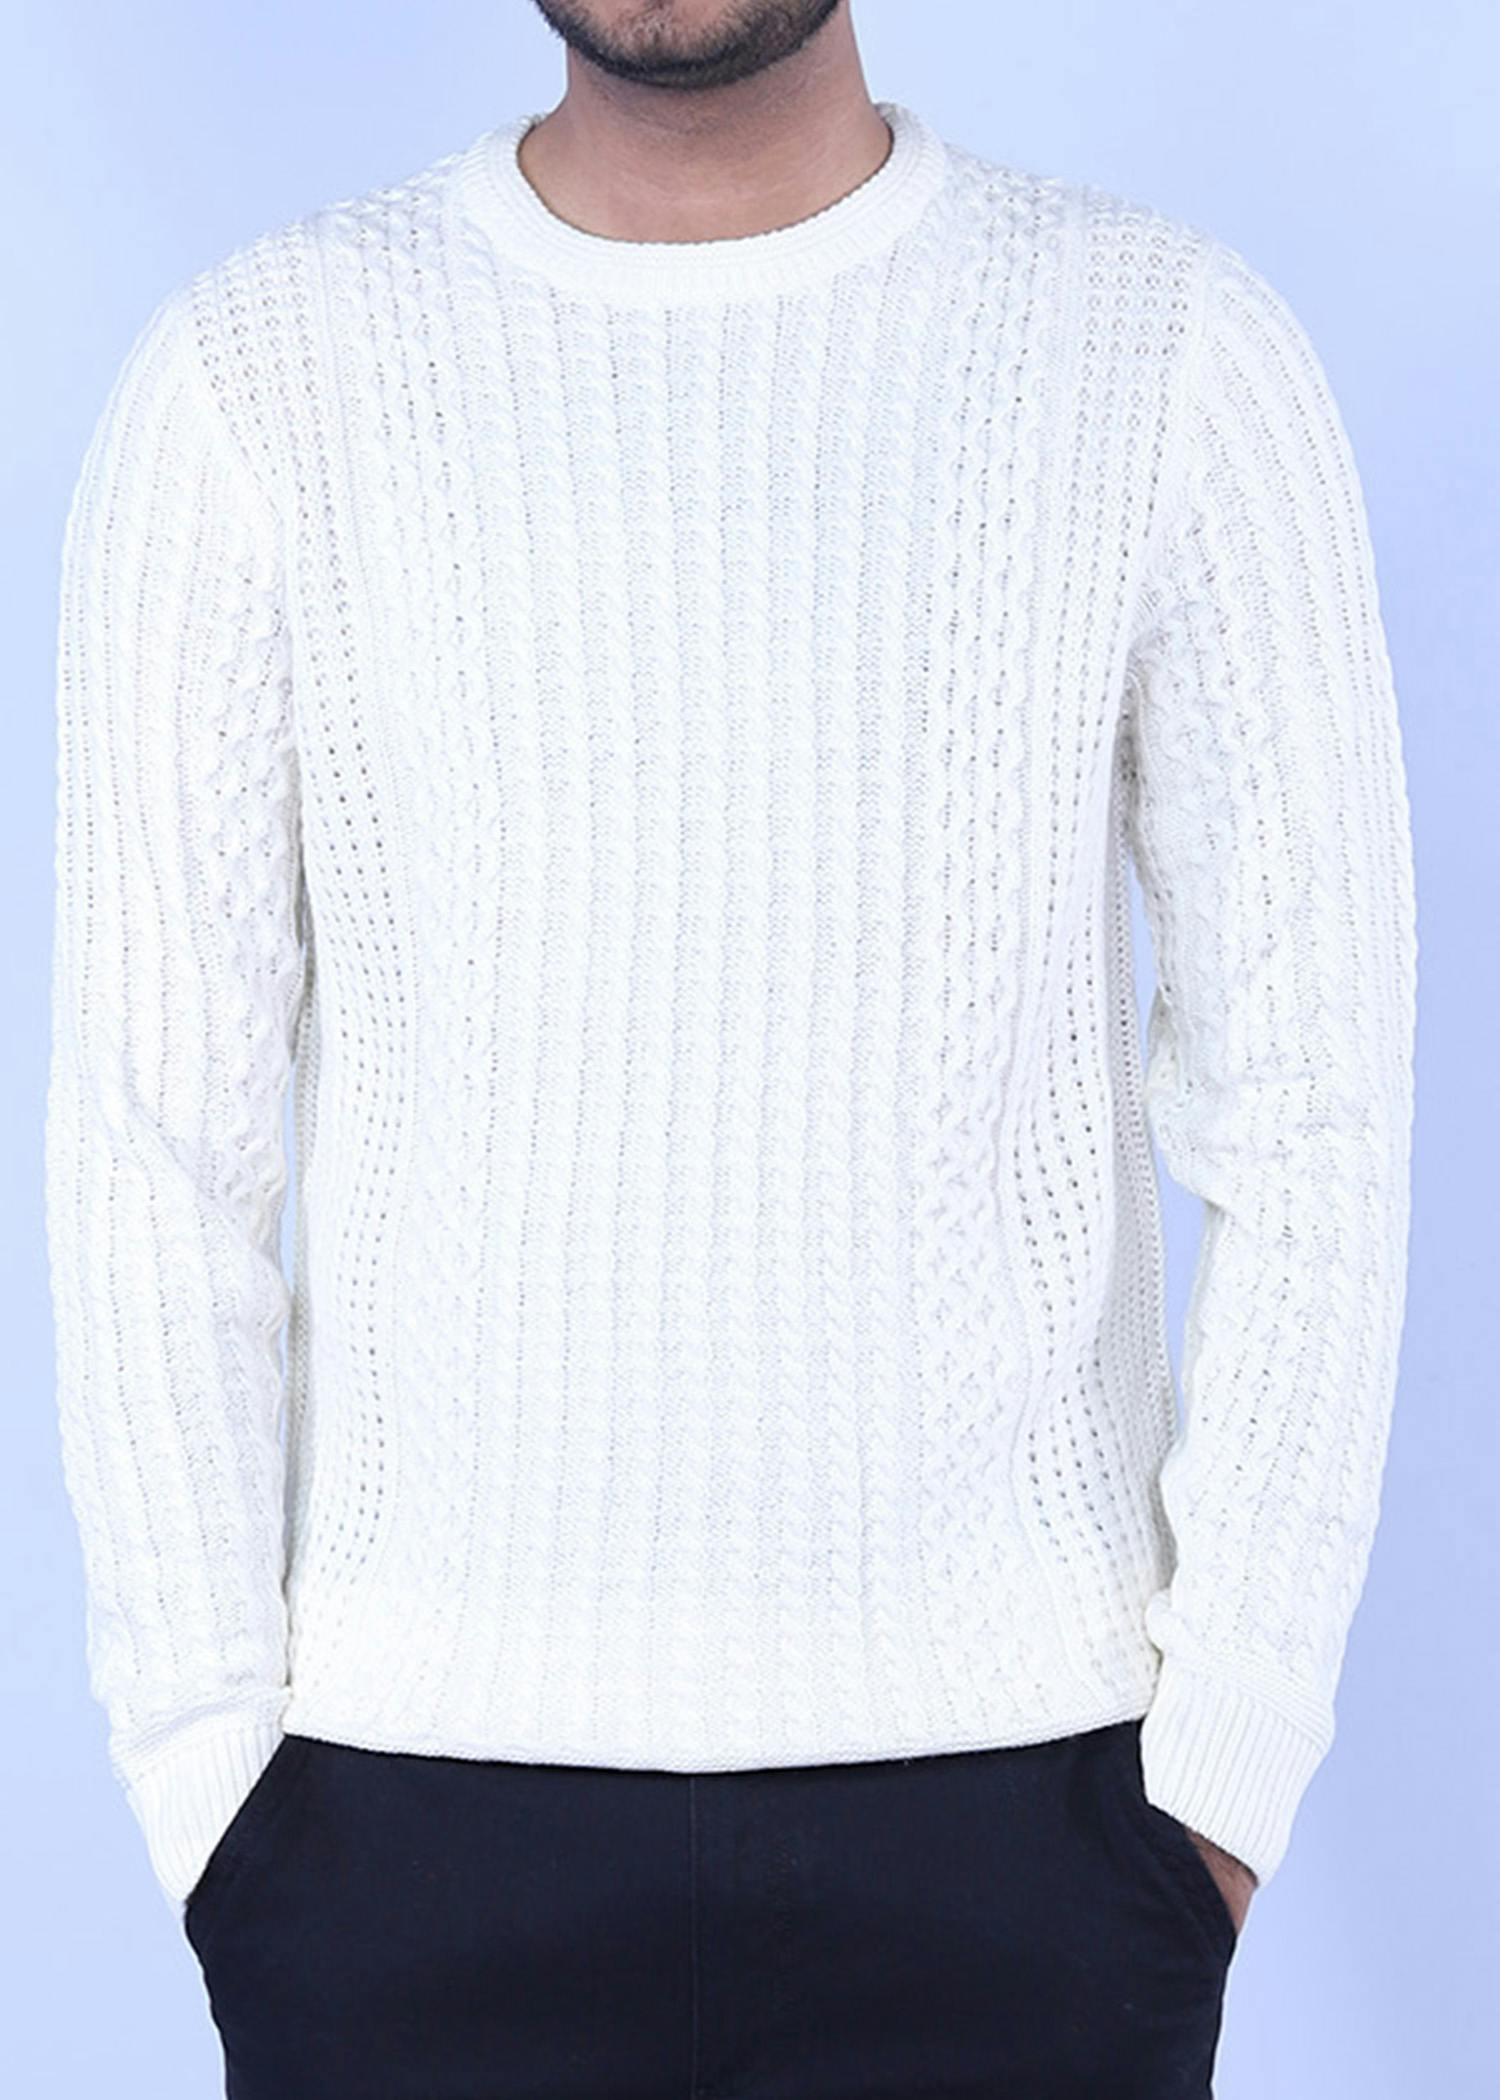 hillstar viii sweater white color headcropped